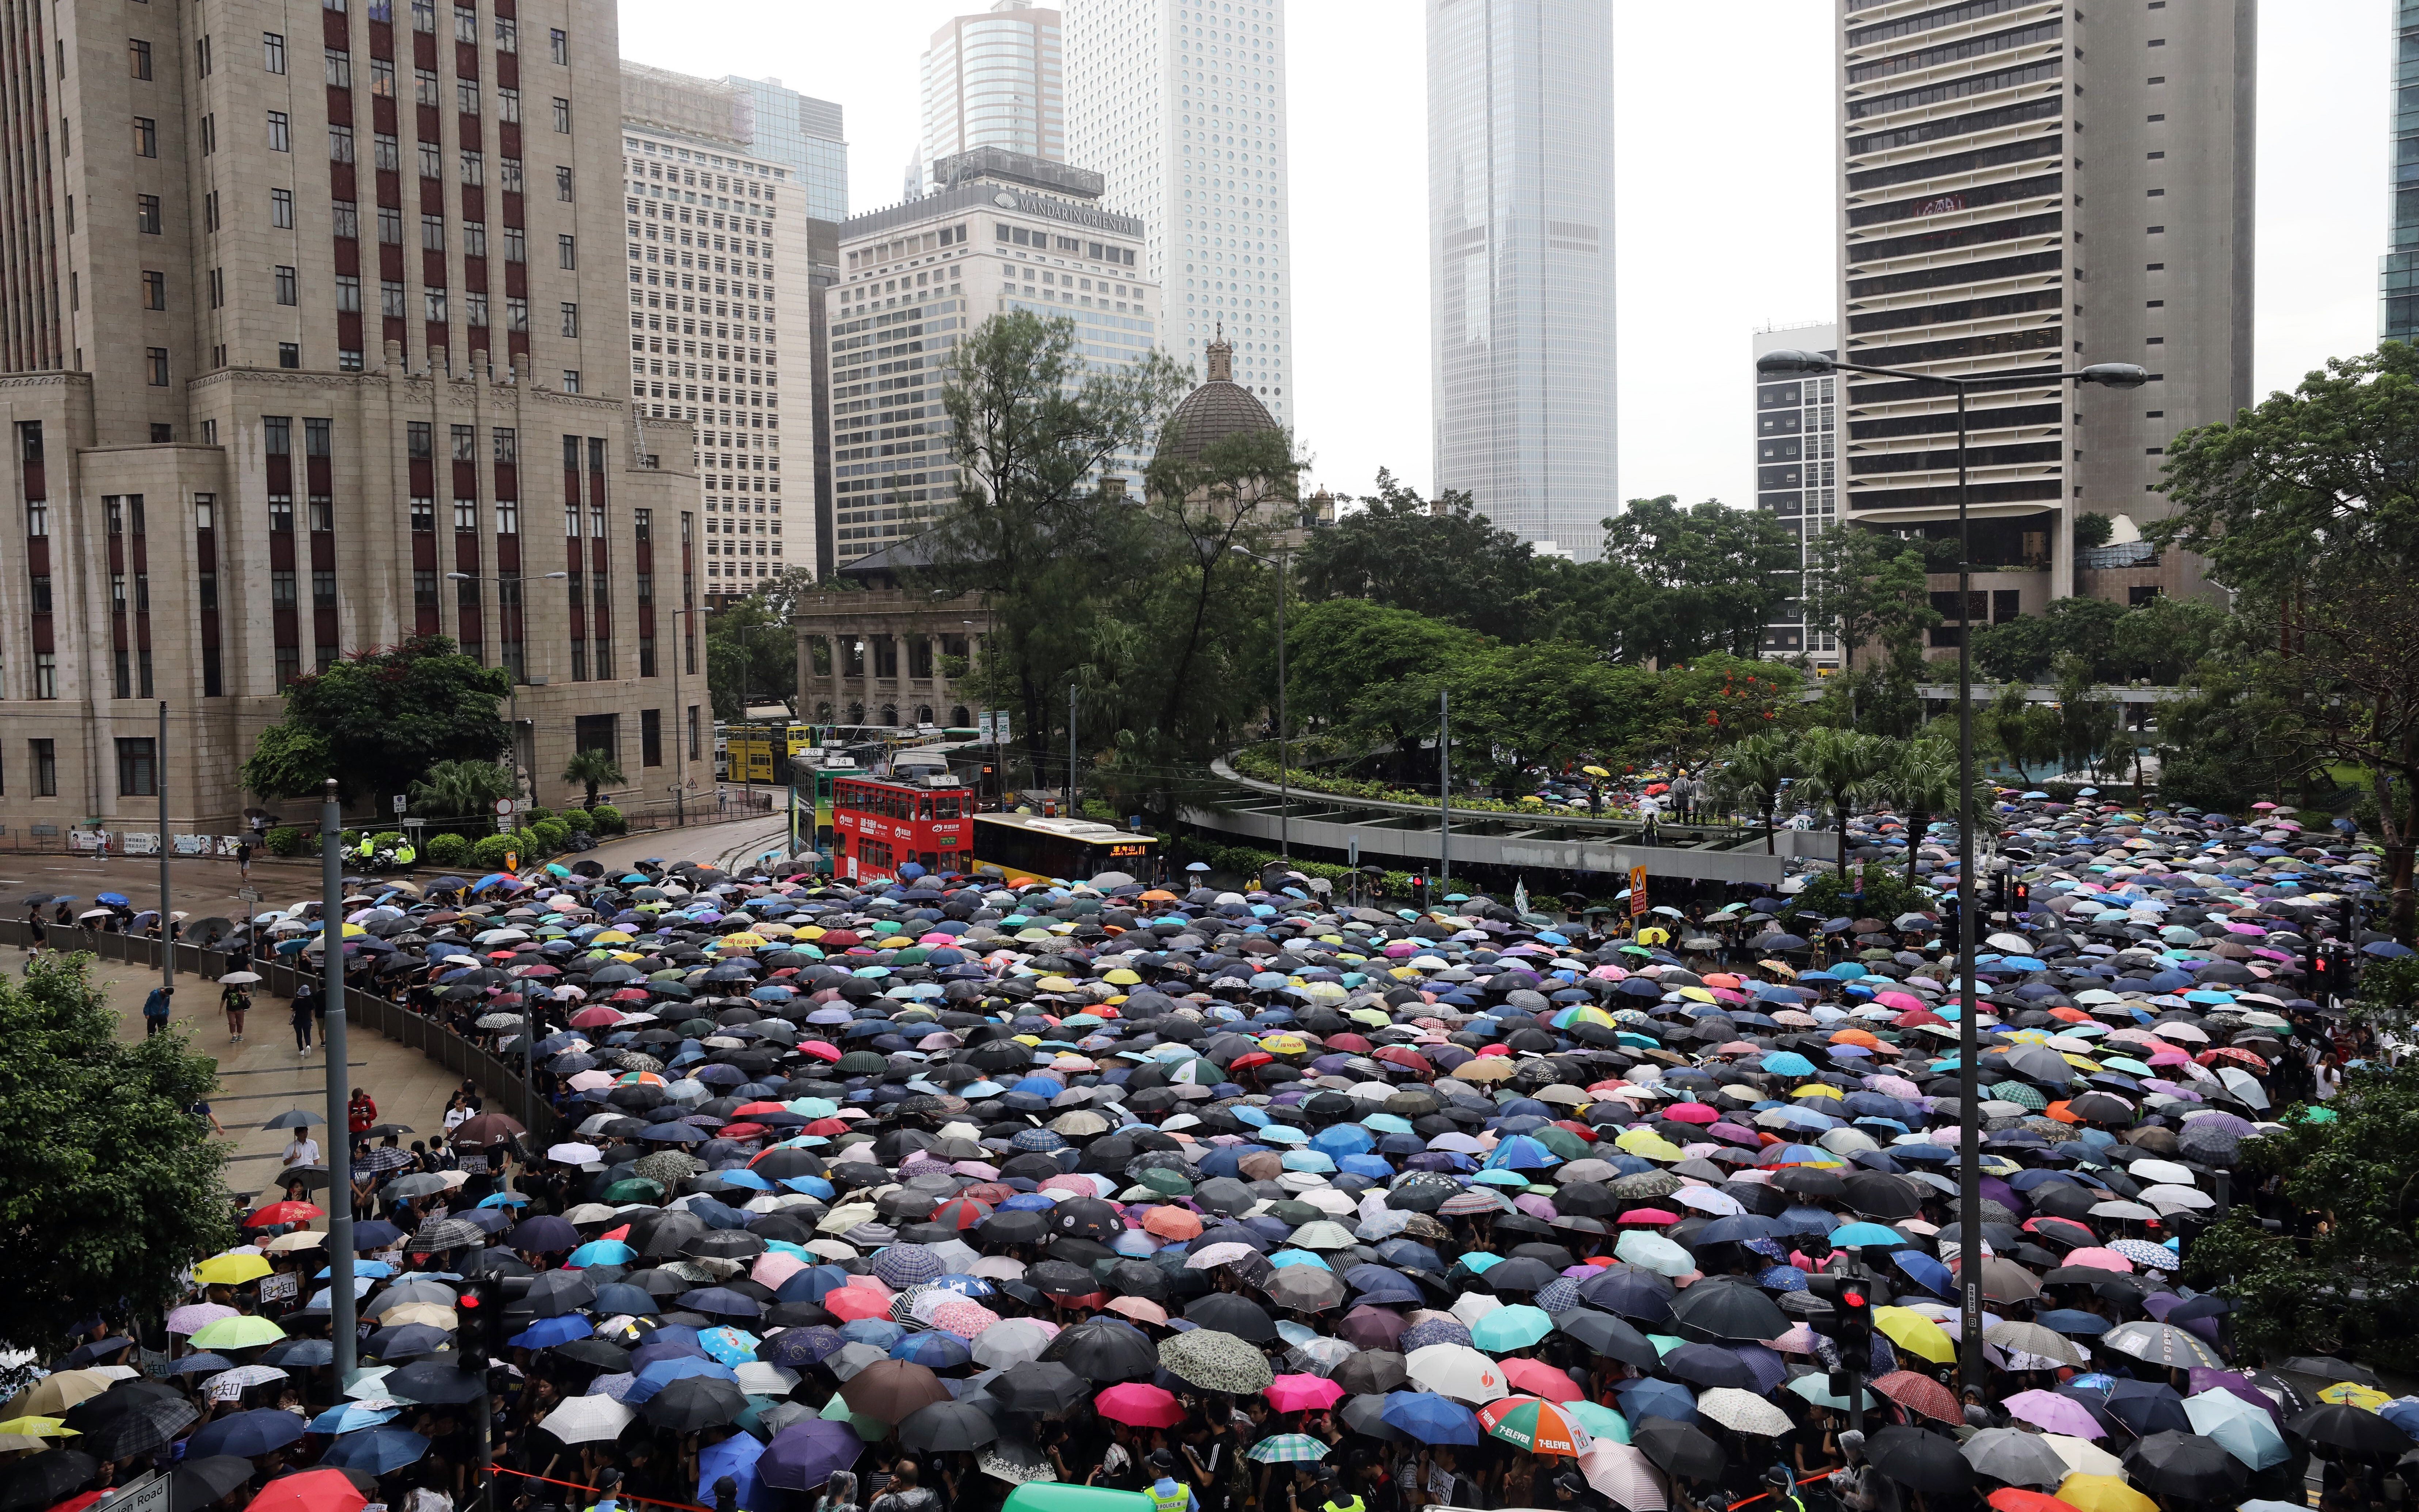 Hong Kong teachers rally for complete withdrawal of the extradition bill at Charter Garden in Central on August 17, 2019. Since the protests, concerns have increasingly been raised in some quarters about teachers politicising the school environment and promoting independence. Photo: Dickson Lee